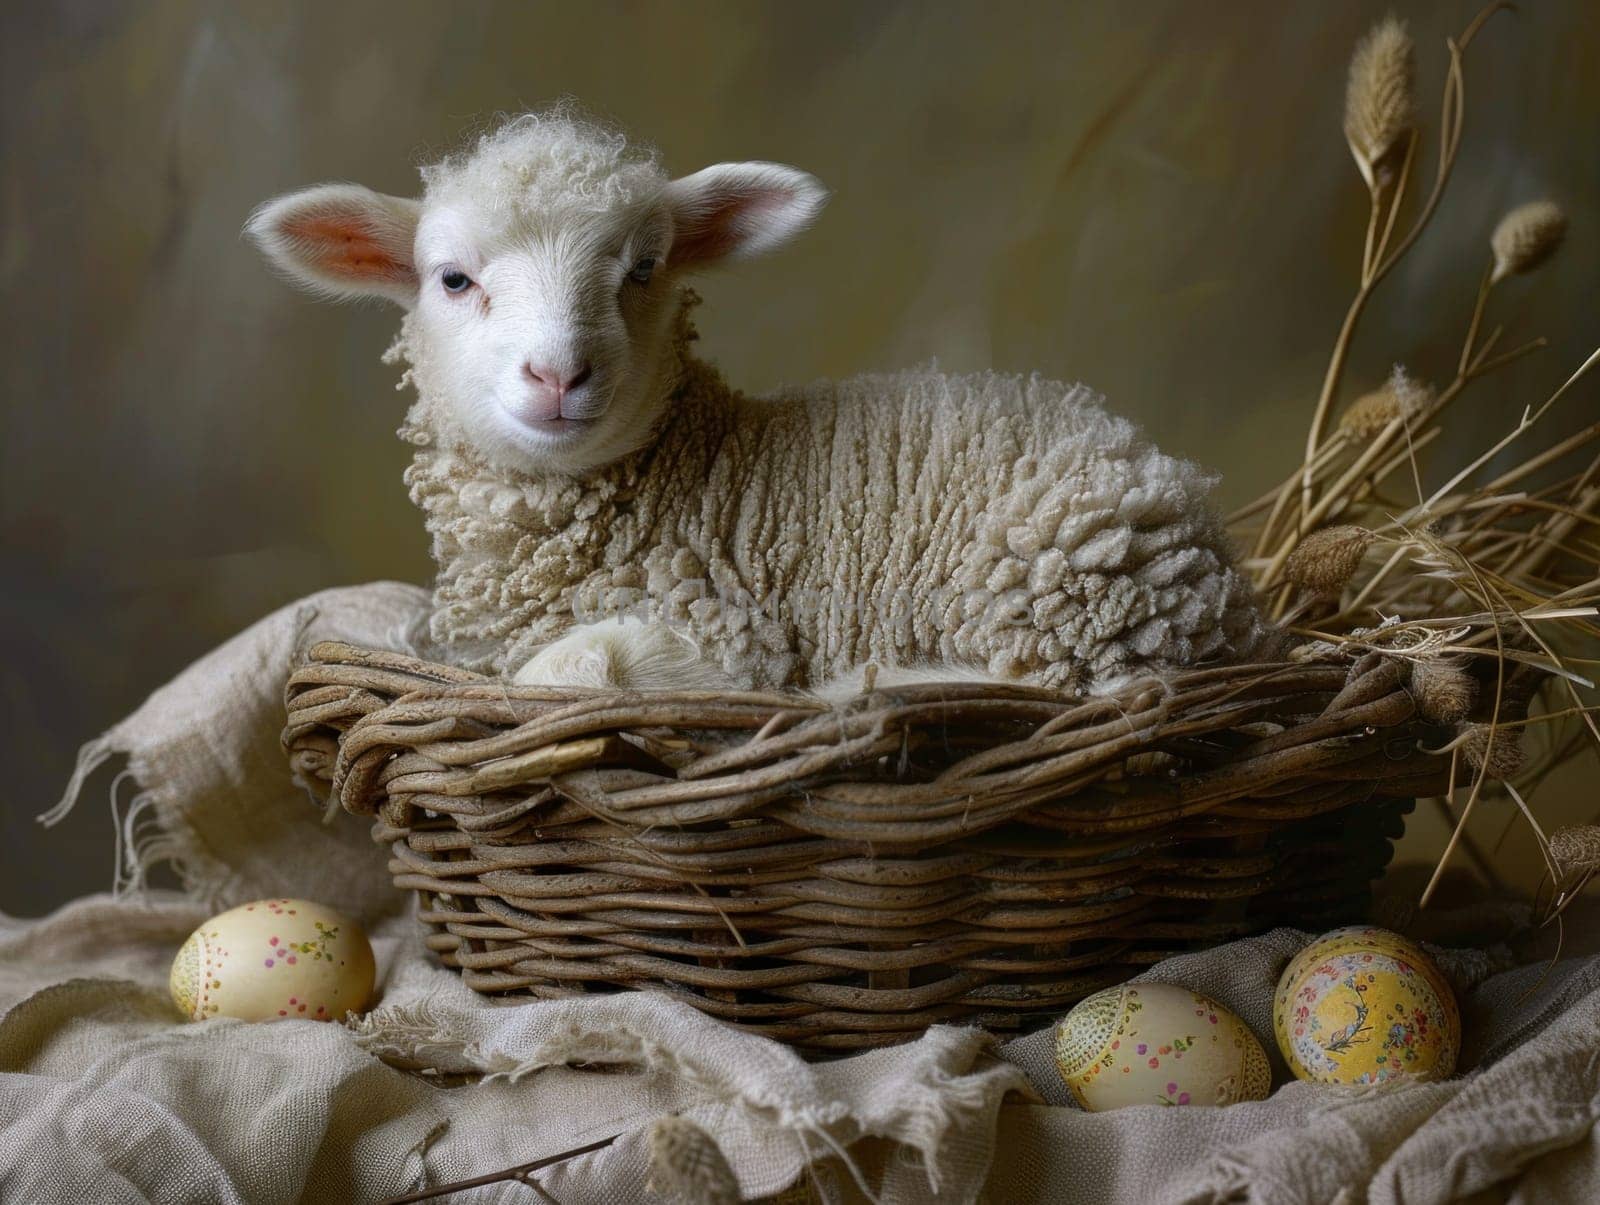 A sheep sits in a basket next to colorful Easter eggs in a charming display.